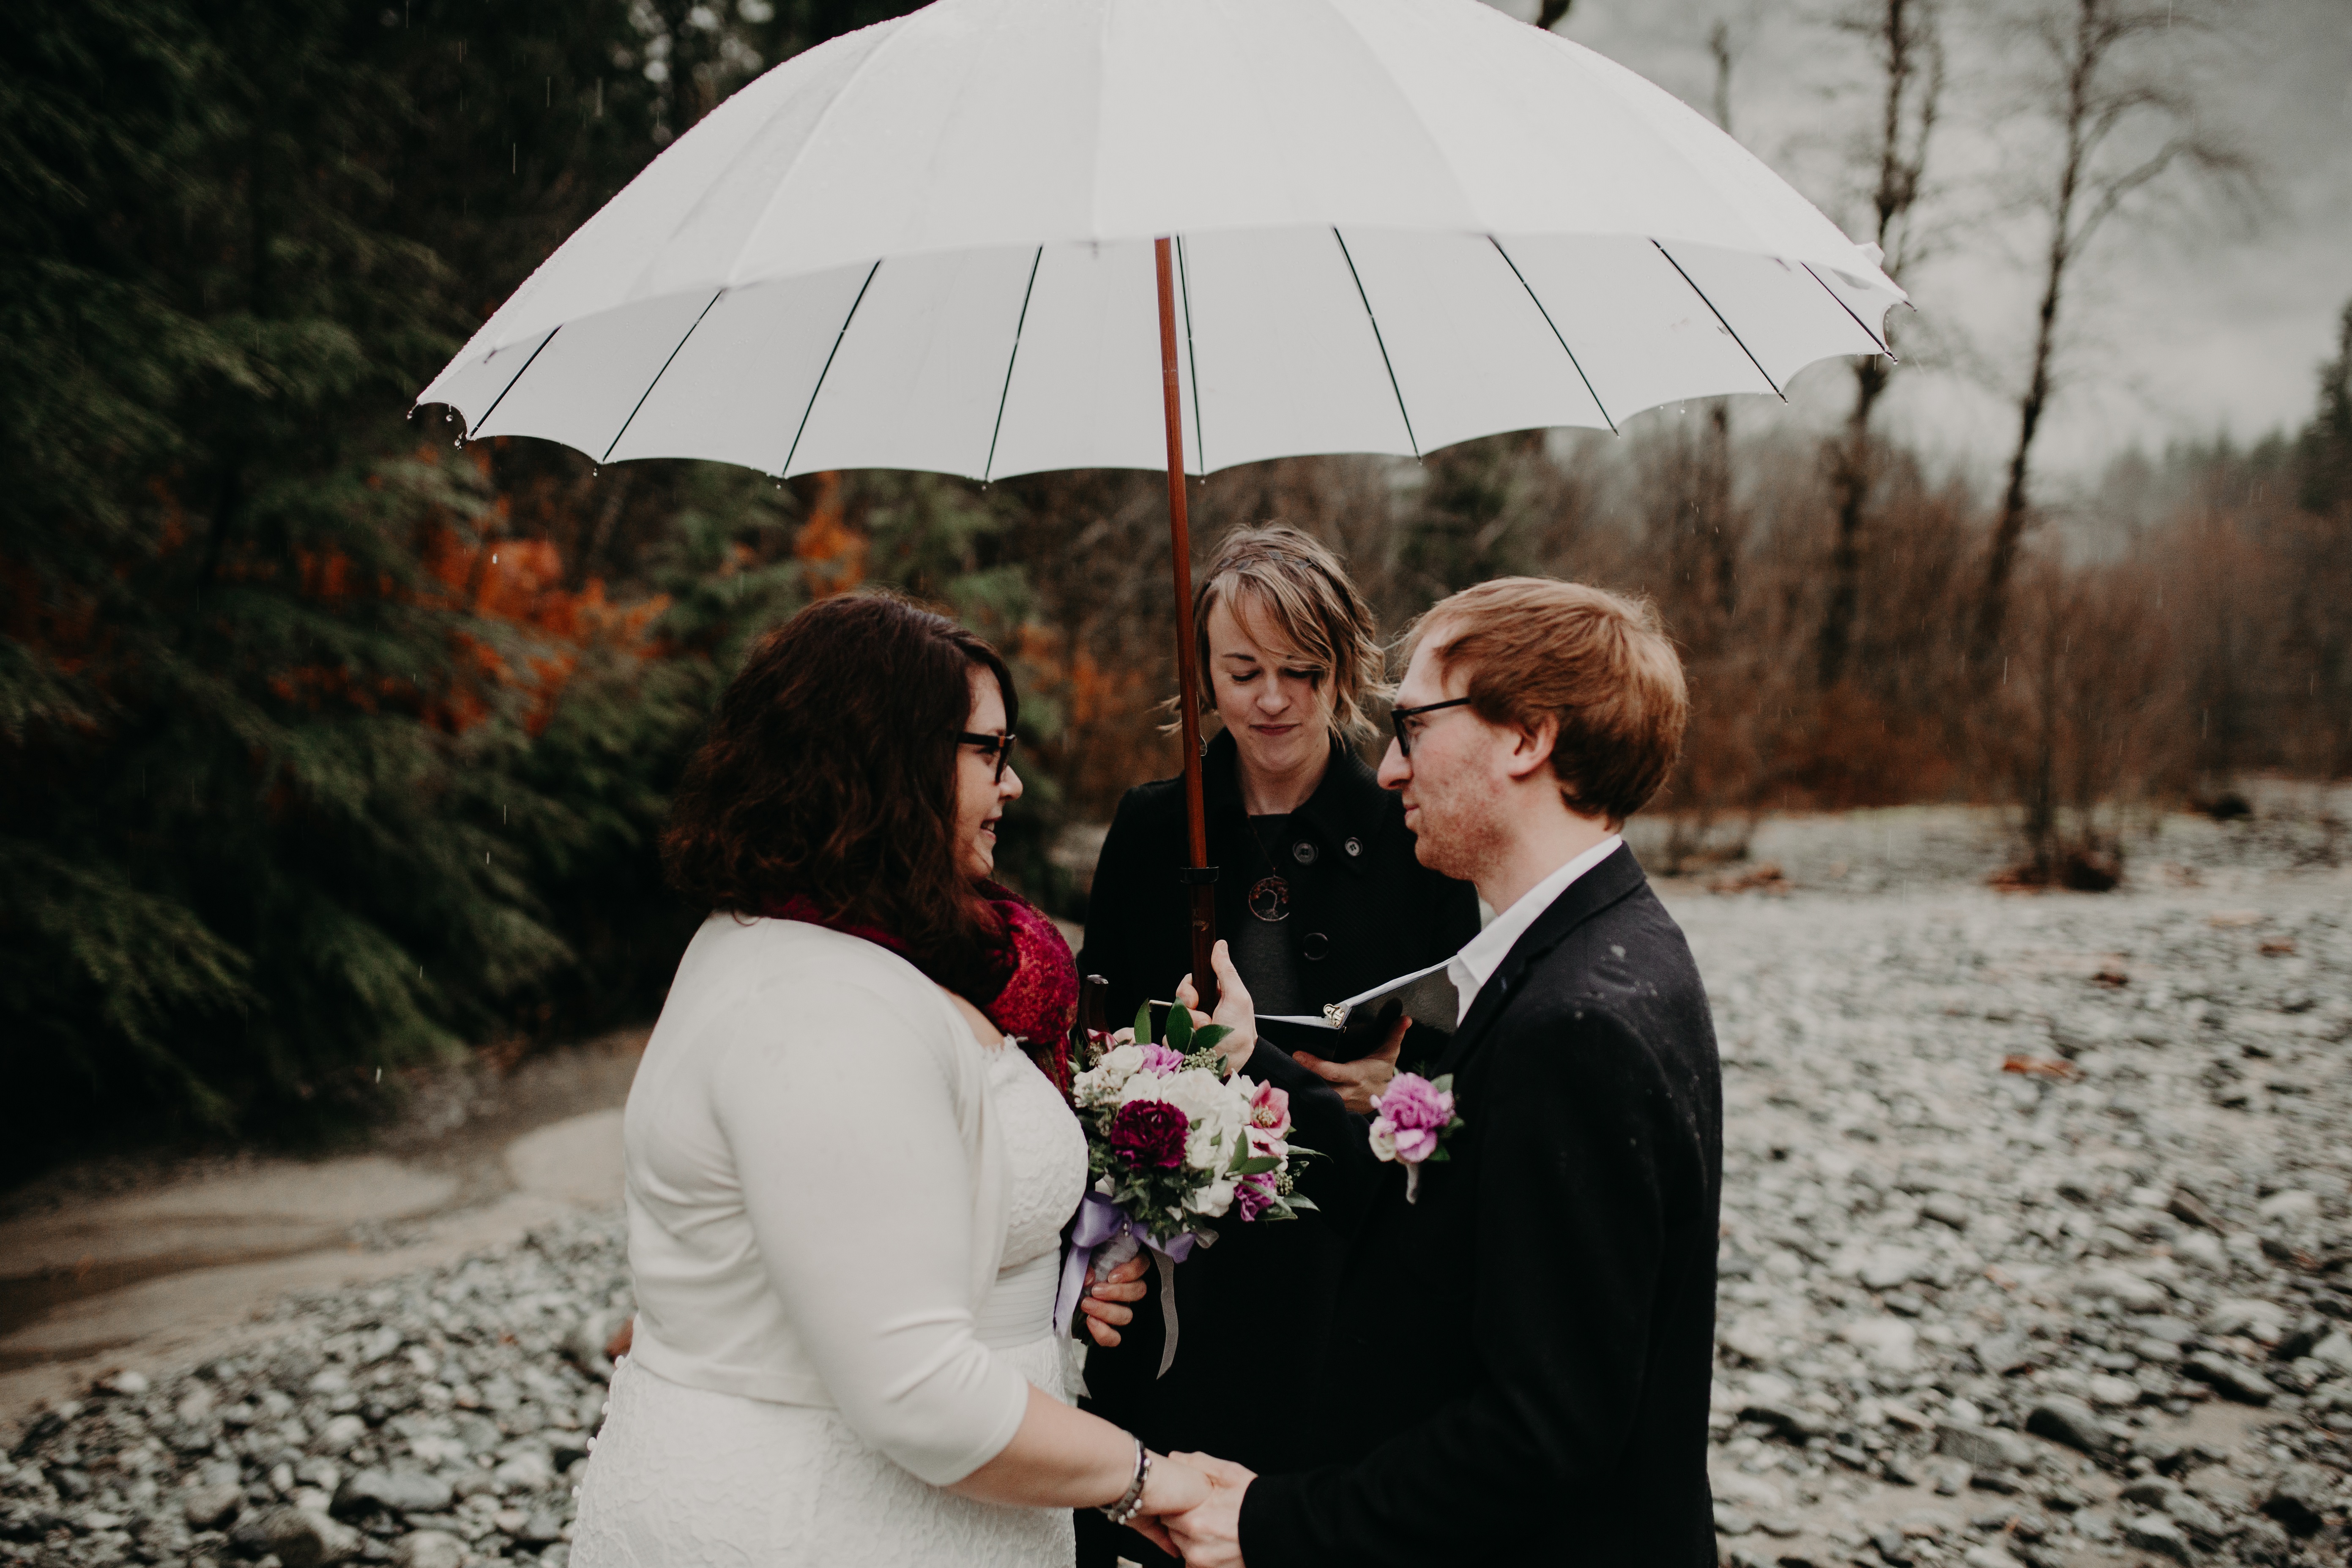 A wedding officiant leading an elopement ceremony